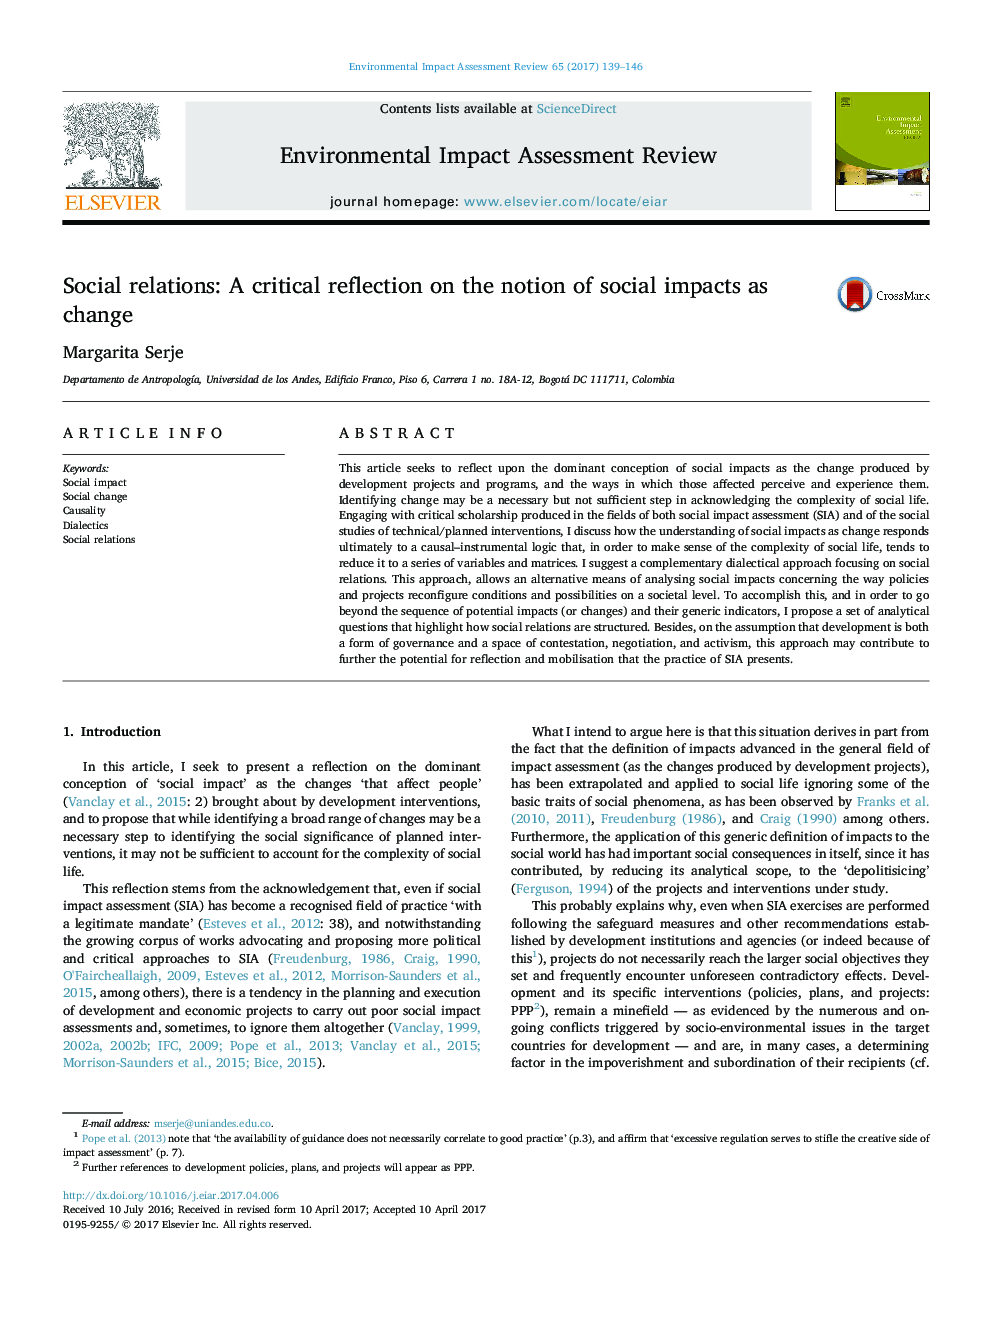 Social relations: A critical reflection on the notion of social impacts as change